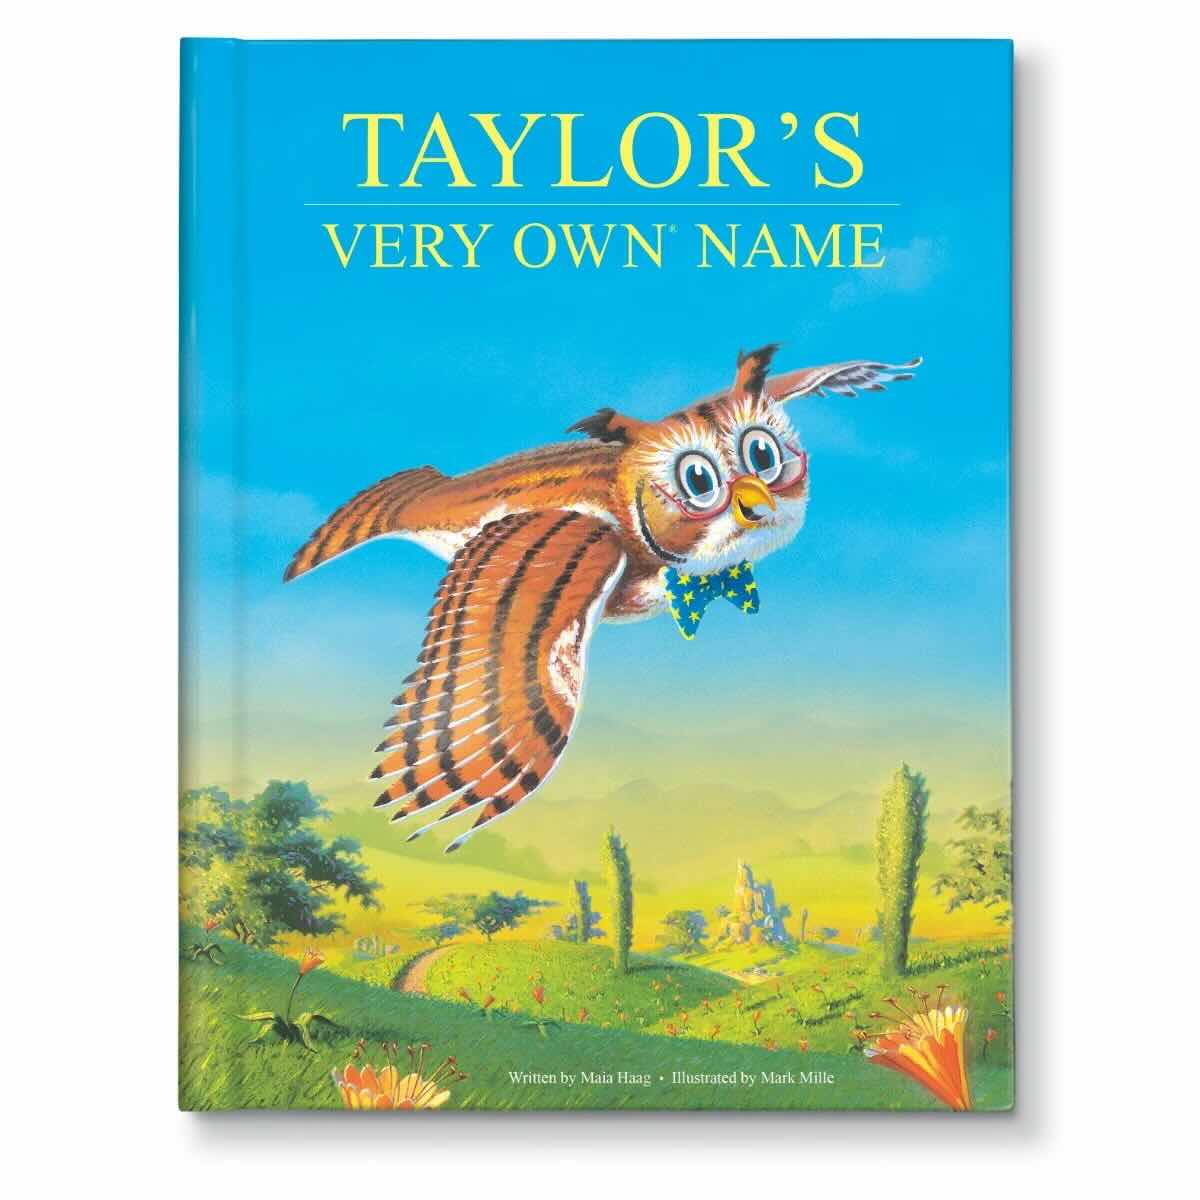 A personalized baby book with the child's name with the title: Taylor's Very Own Name 